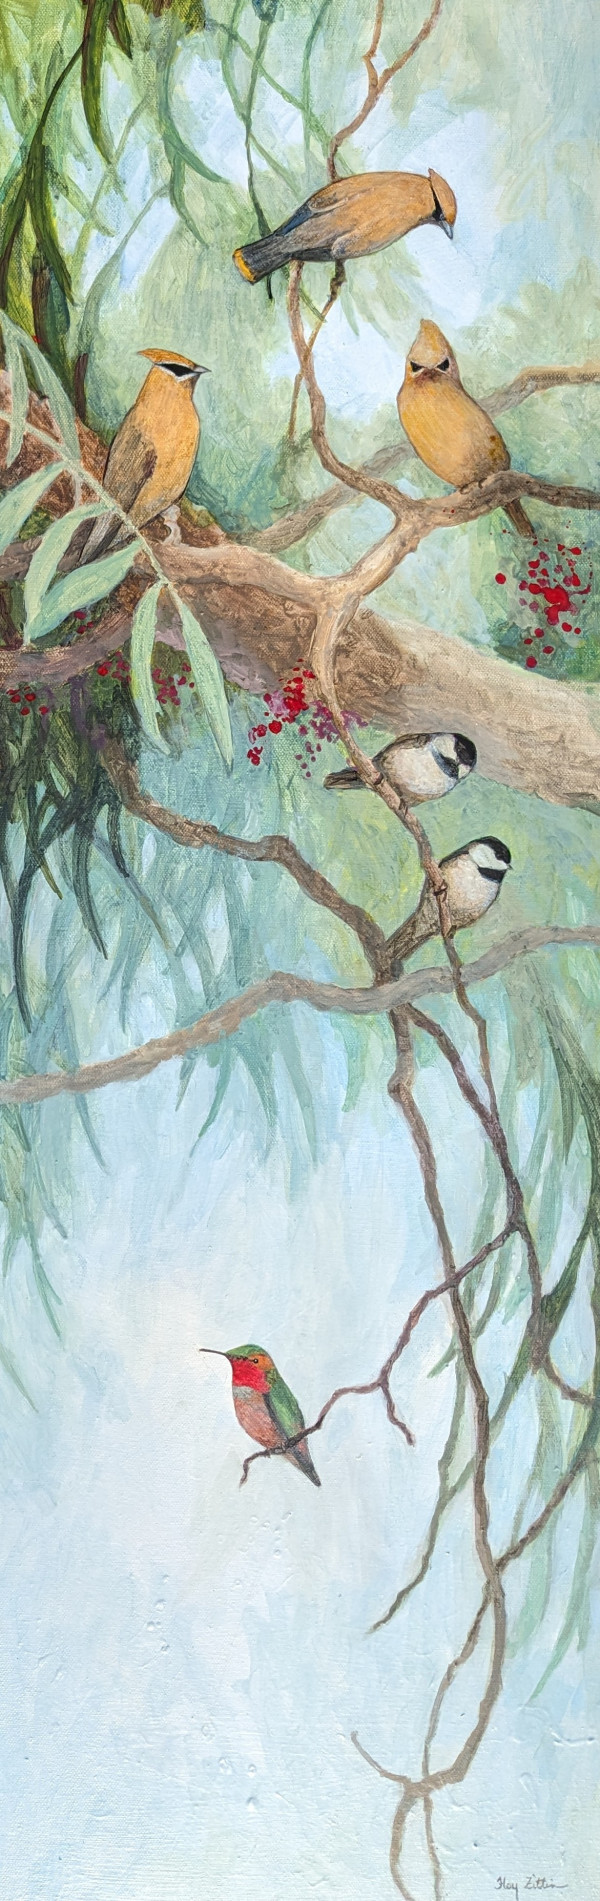 Waxwings, Chickadees and a Hummingbird by Floy Zittin